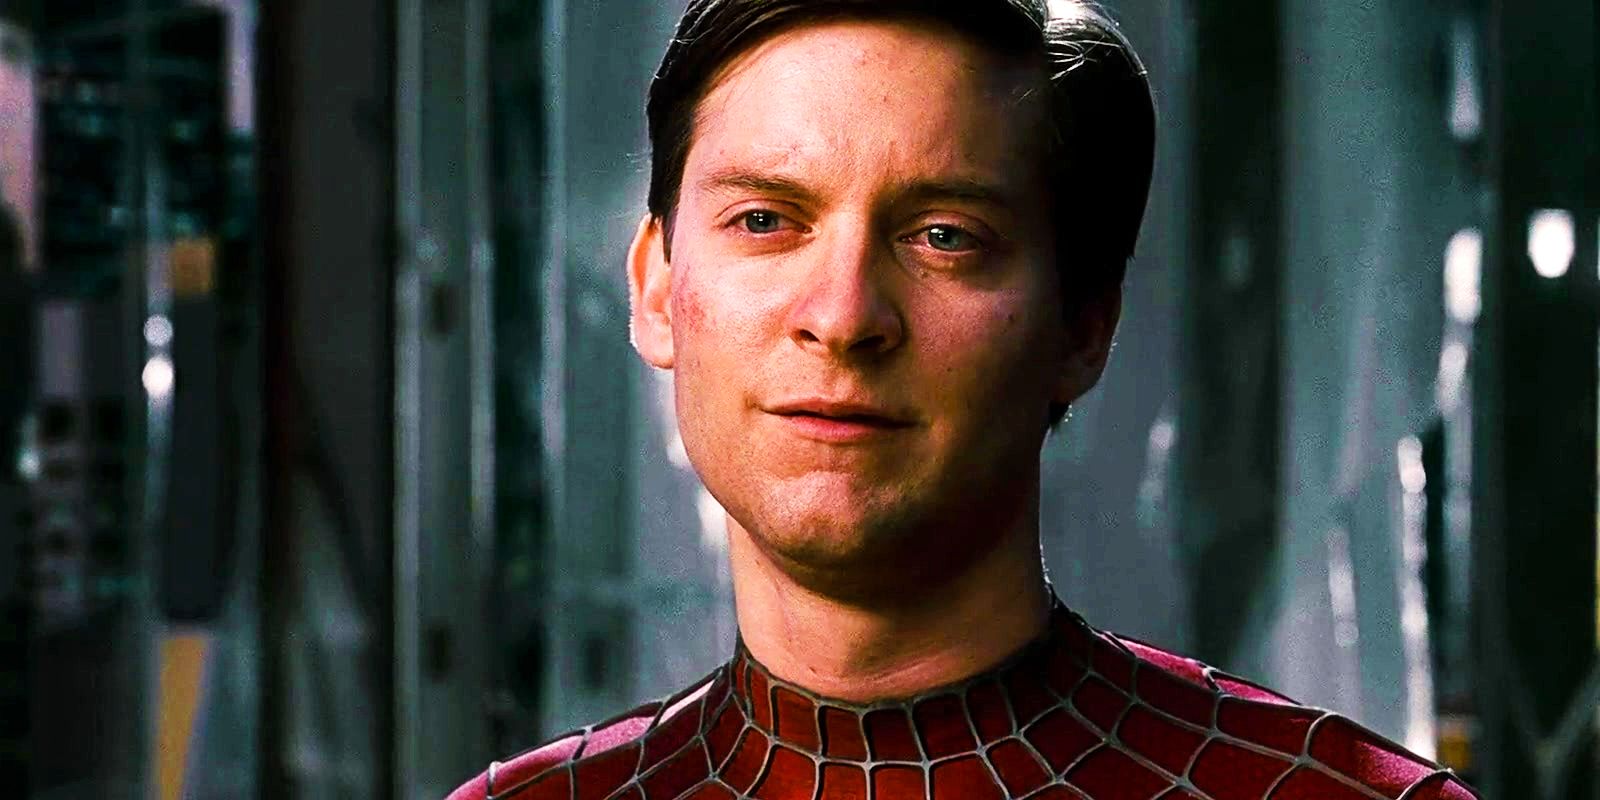 Tobey Maguire as Spider-Man looking sad in Spider-Man 3